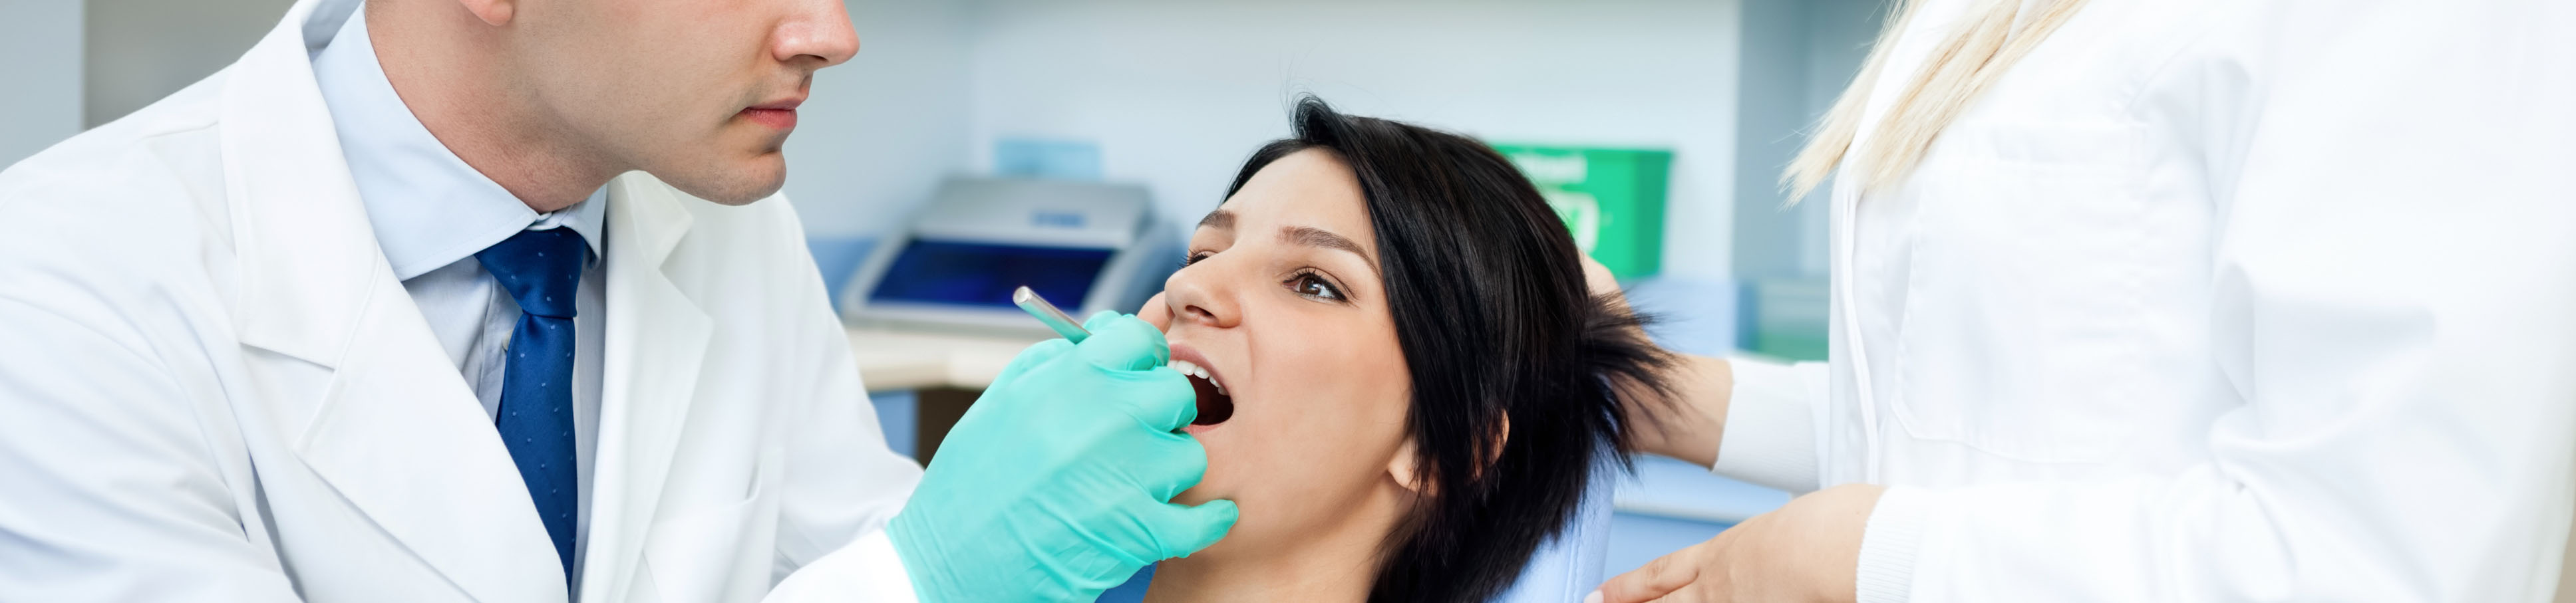 Routine Dental Check up for Adults and Kids